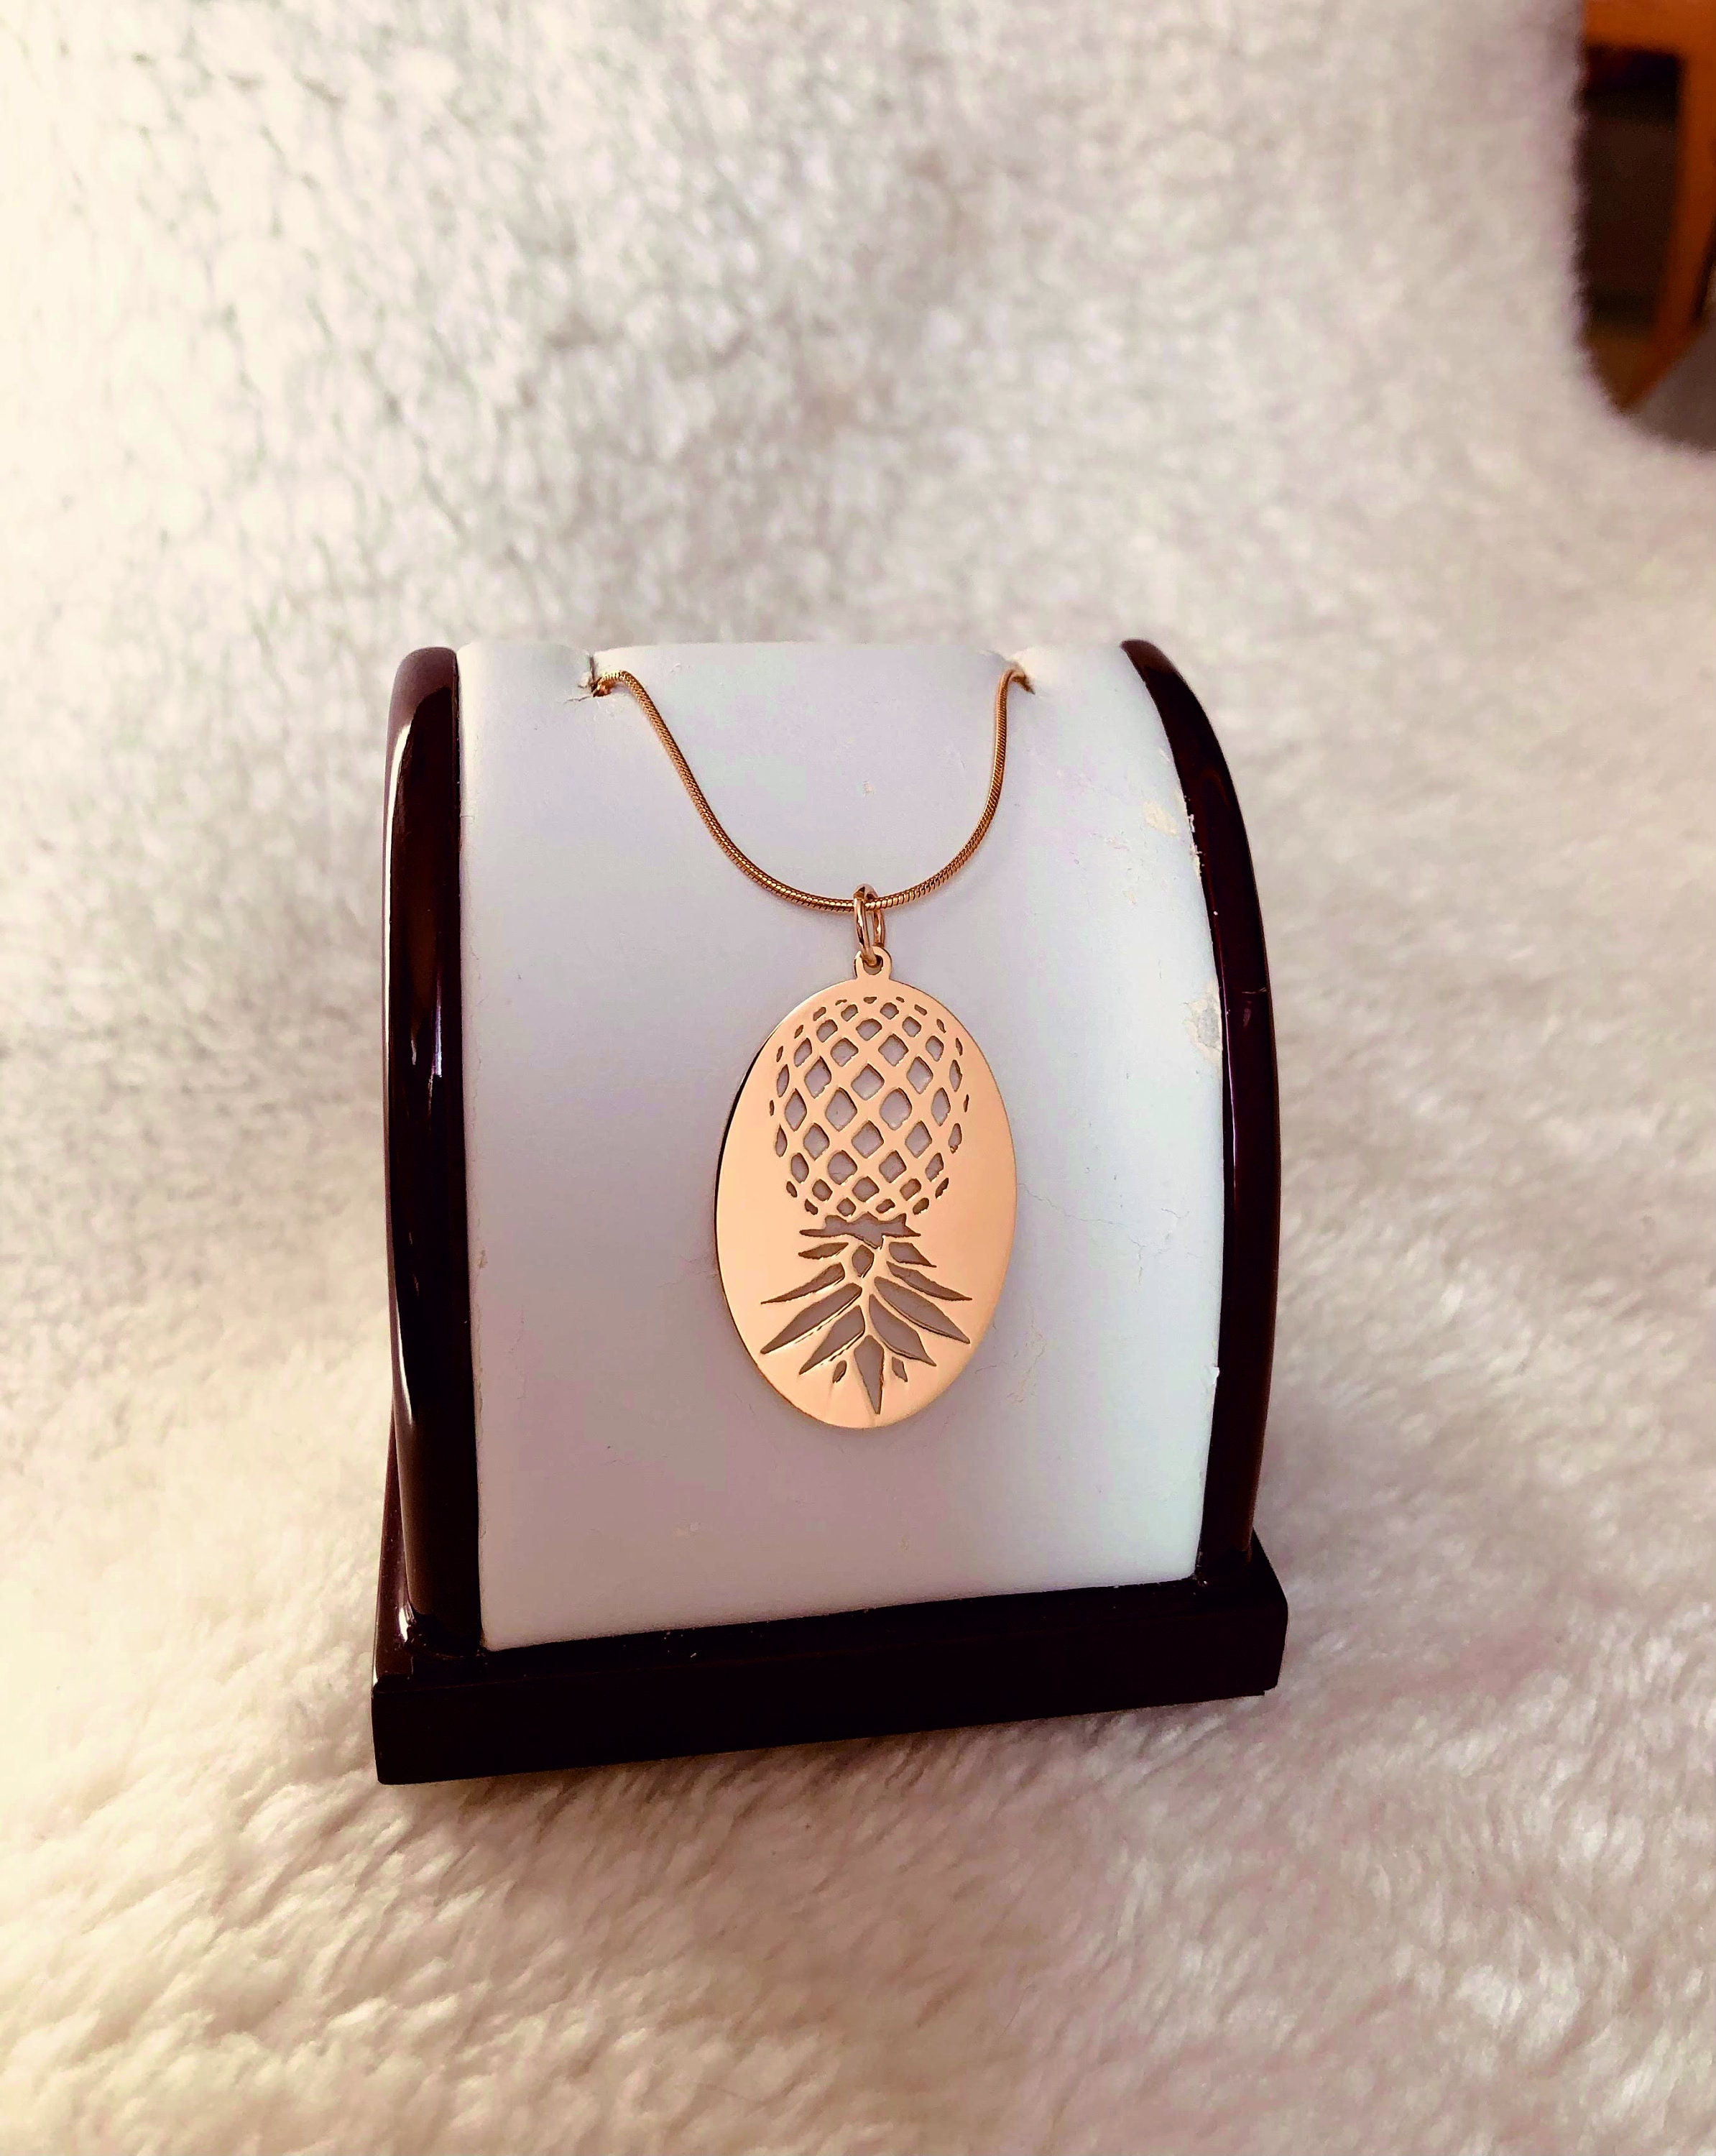 Goldfilled Pineapple Necklace With Golfilled Chain Swing Time